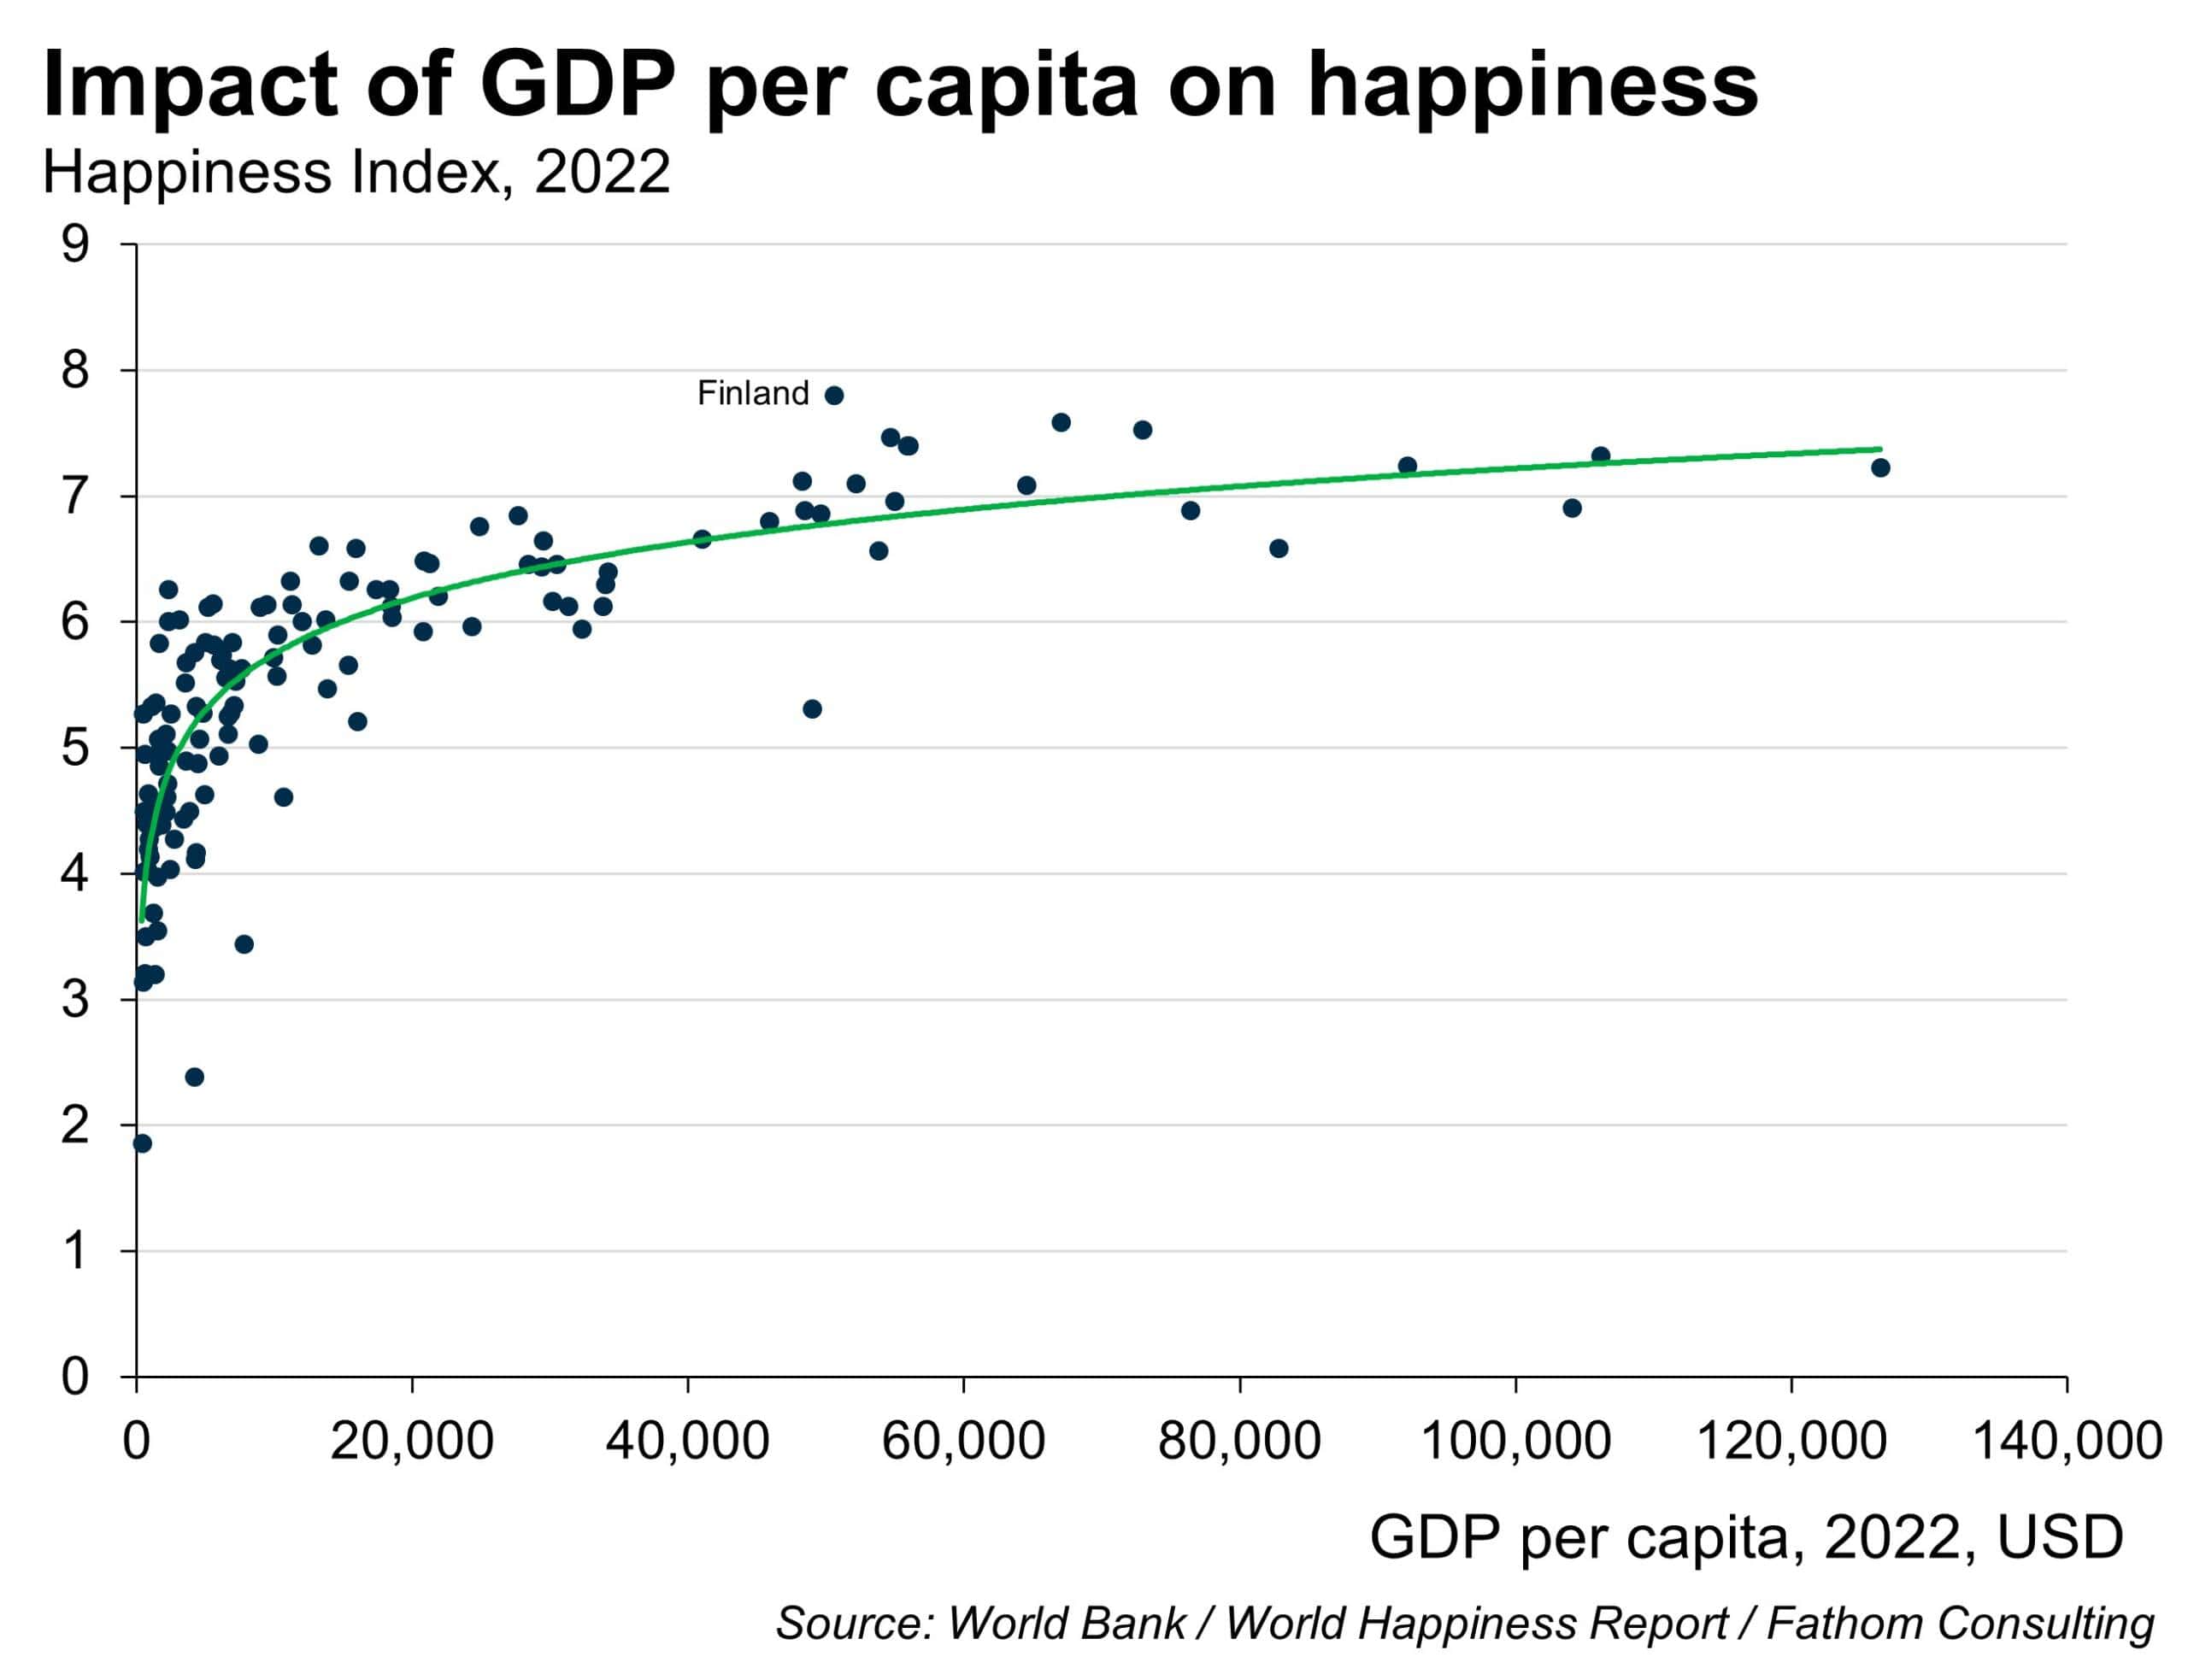 GDPs impact per capital on happiness measured as GDP per capital, 2022 (in USD) per country